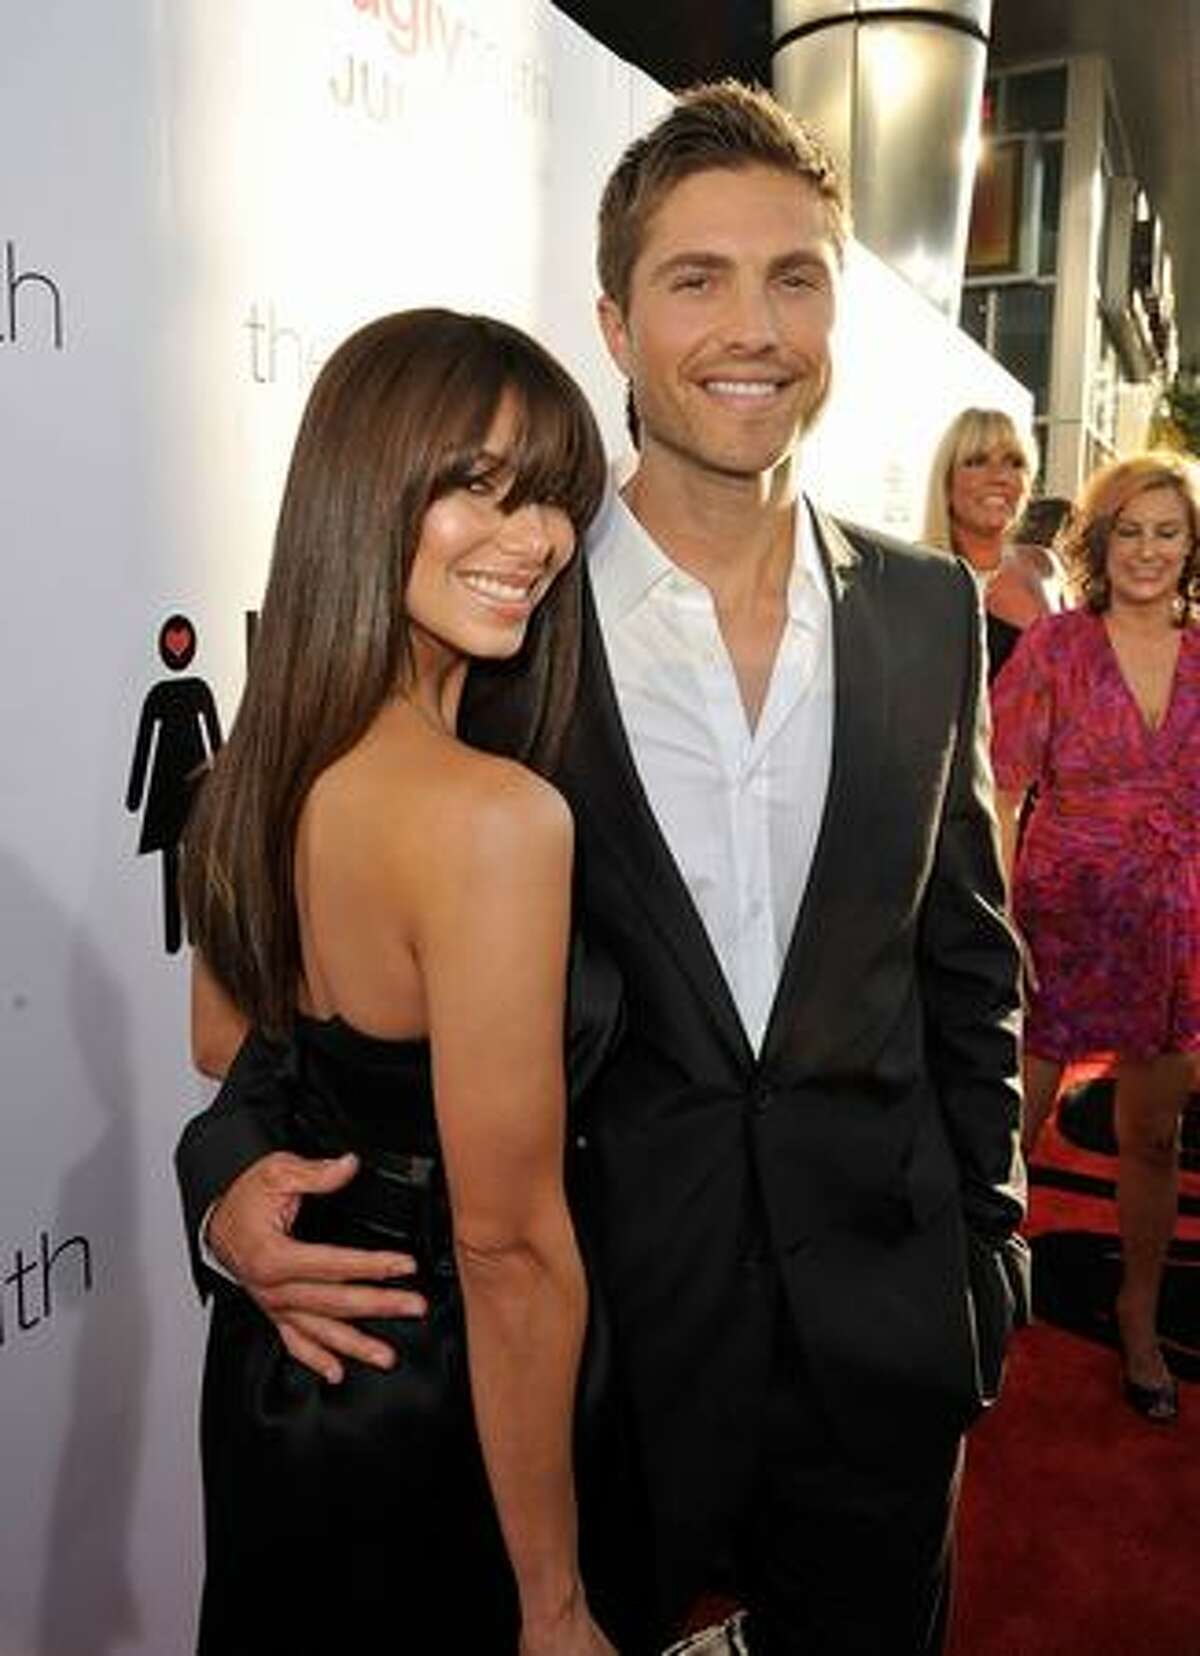 Actress Roselyn Sanchez (L) and actor Eric Winter arrive at the premiere of Columbia Pictures' "The Ugly Truth" held at Pacific's Cinerama Dome in Hollywood, California.